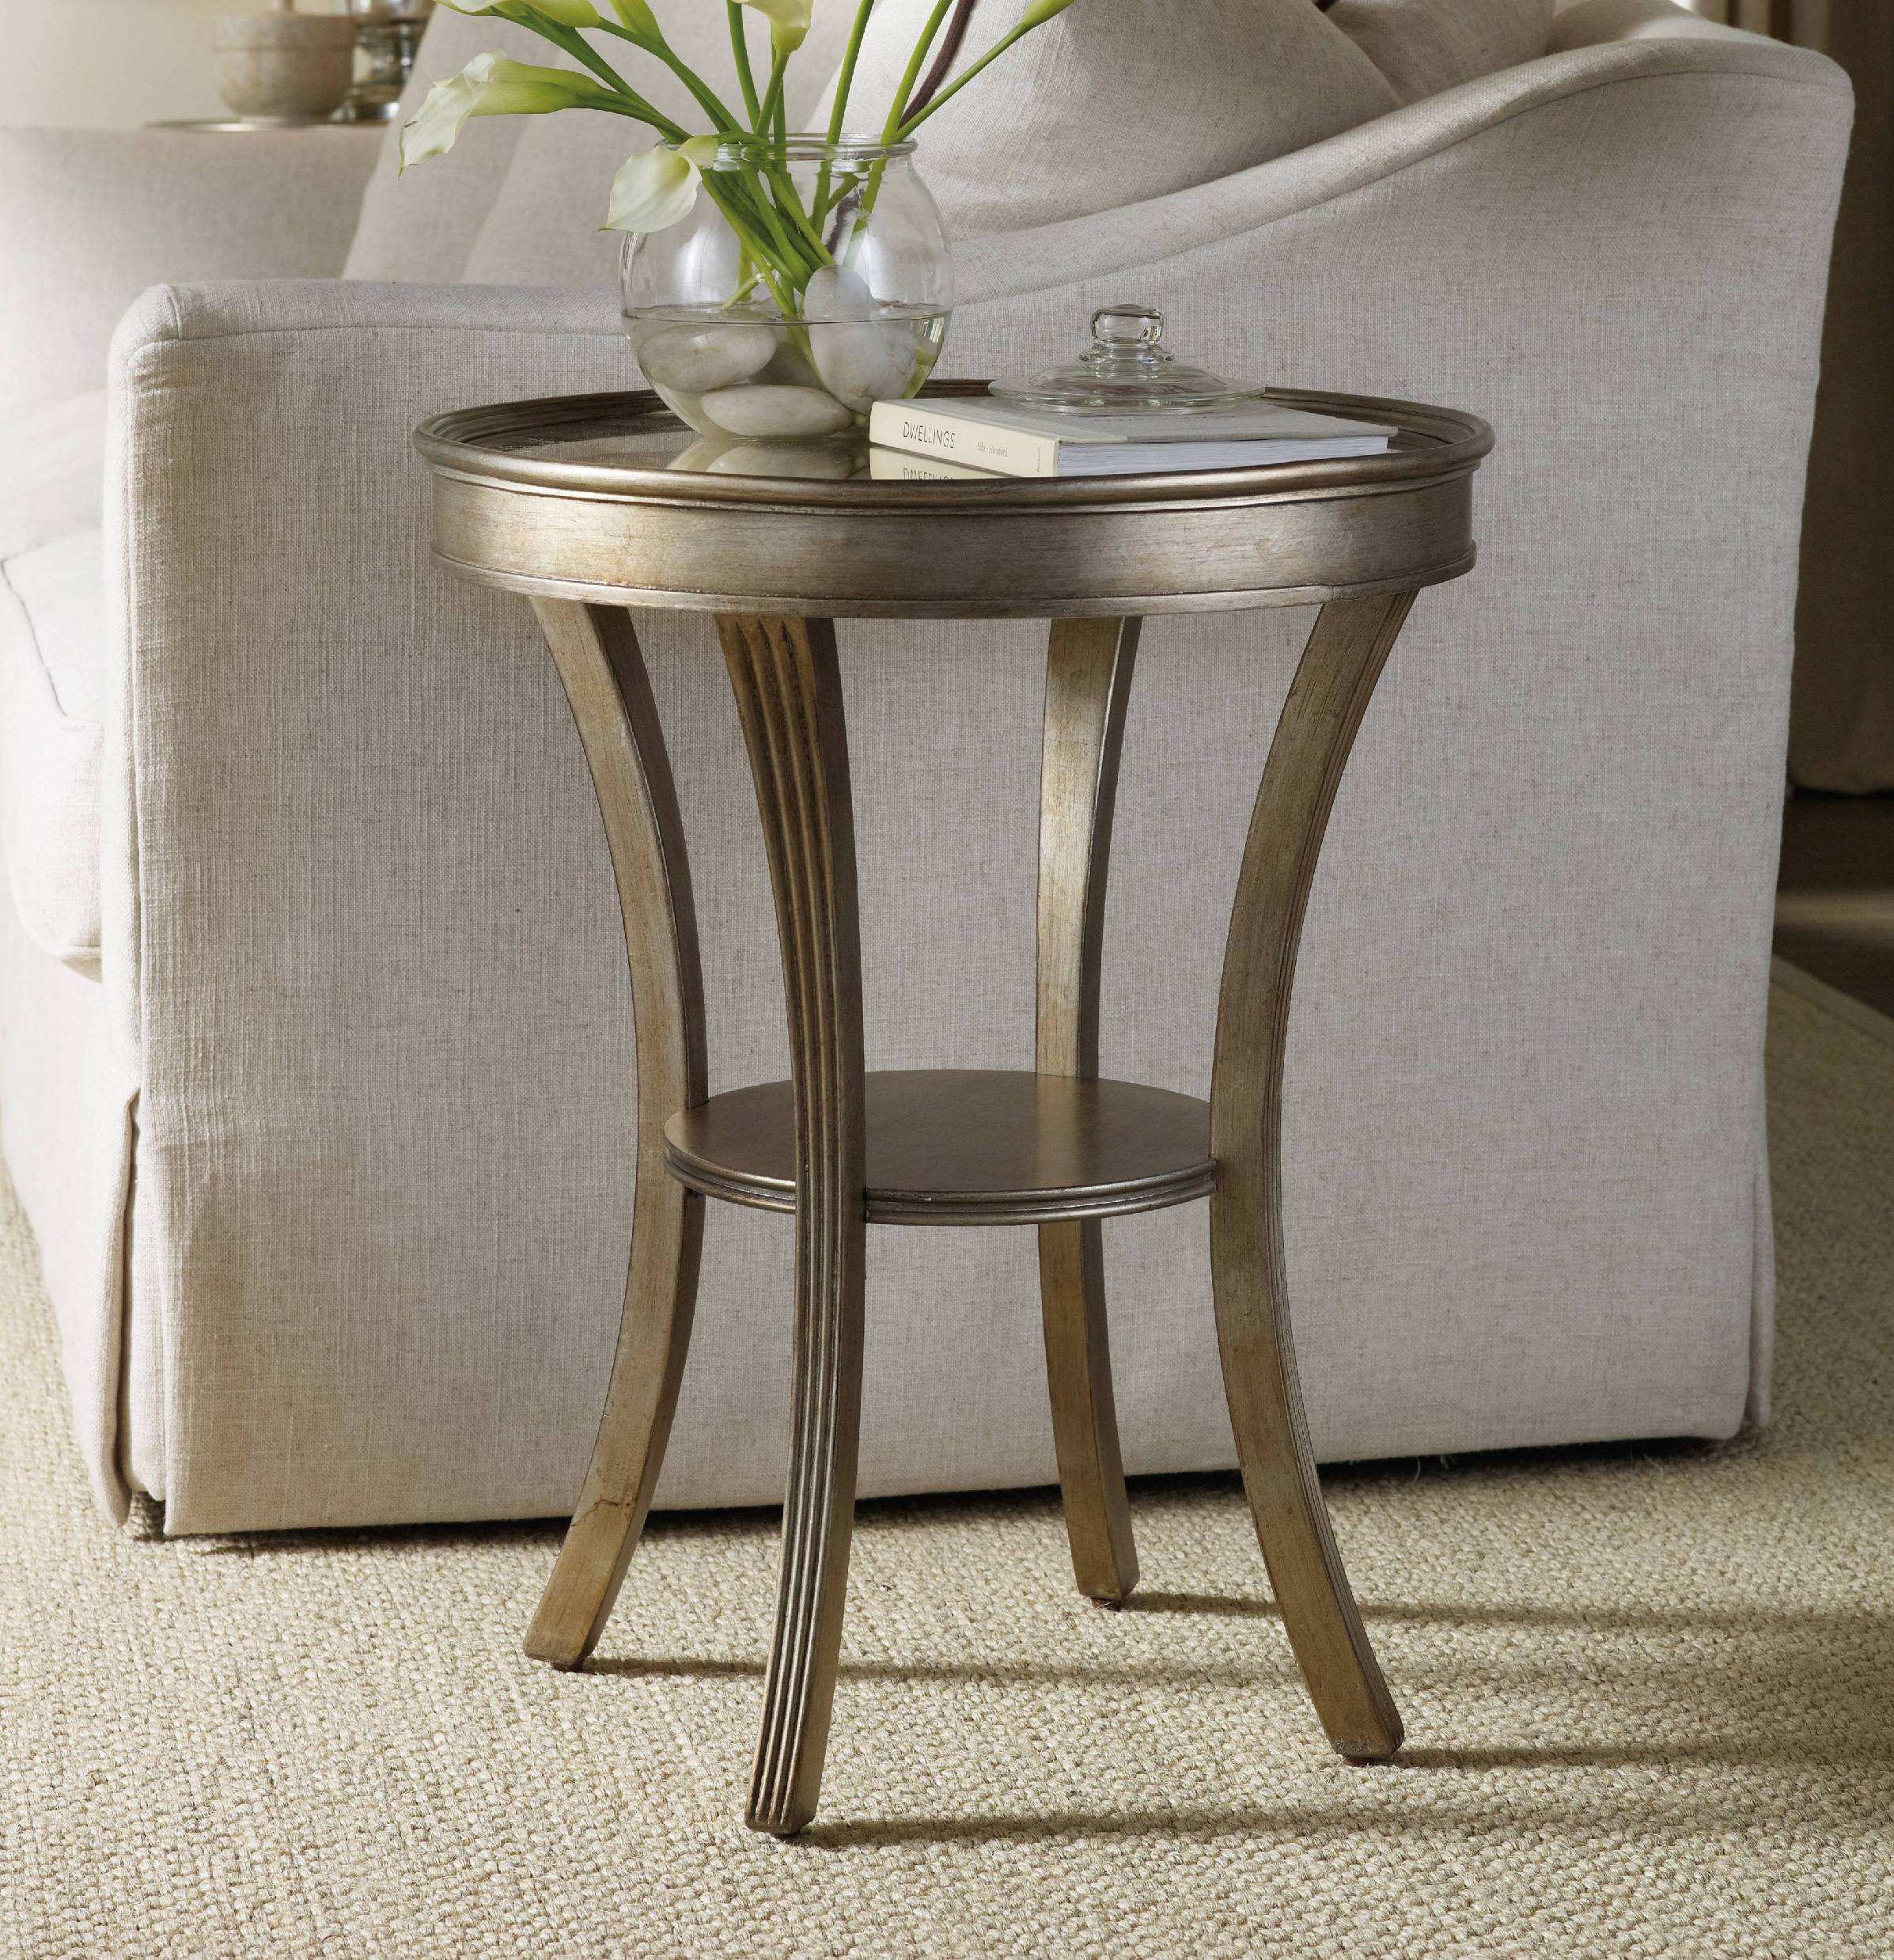 cool unique end table ideas for woodworking plans newest accent tables furniture small designs ethan allen lighting distressed blue brass nautical lights antique bronze side white